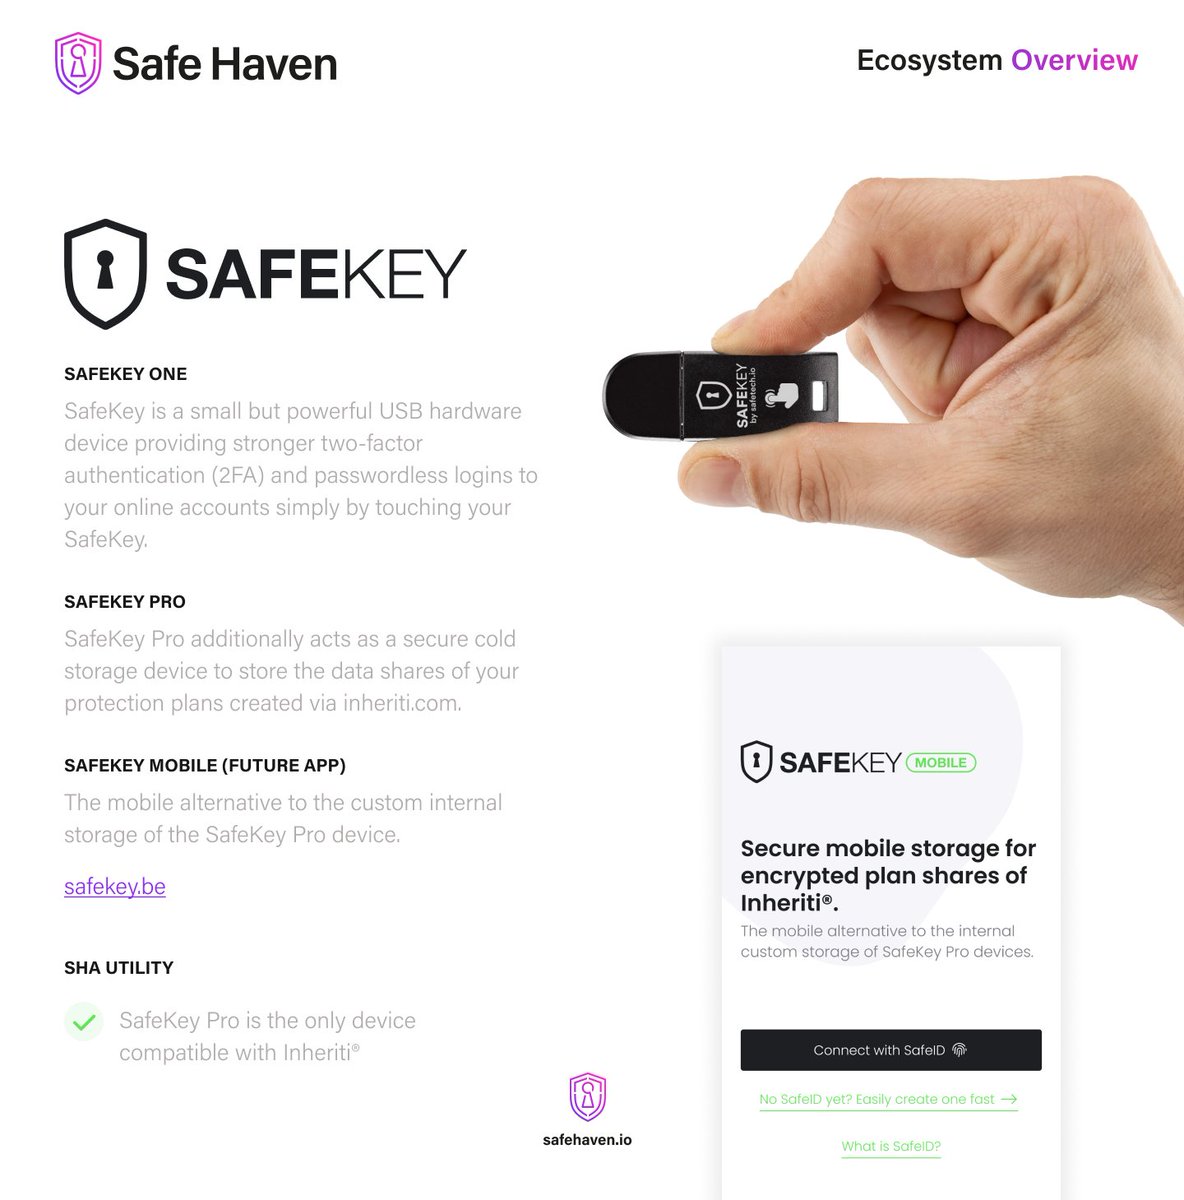 Stay ahead of the security curve! 🔐 Activate @SafeKeyU2F for that extra layer of protection on all your digital transactions. Because your security is our priority. 🛡️ $SHA #SafeHaven #Security #Blockchain #SafeKey